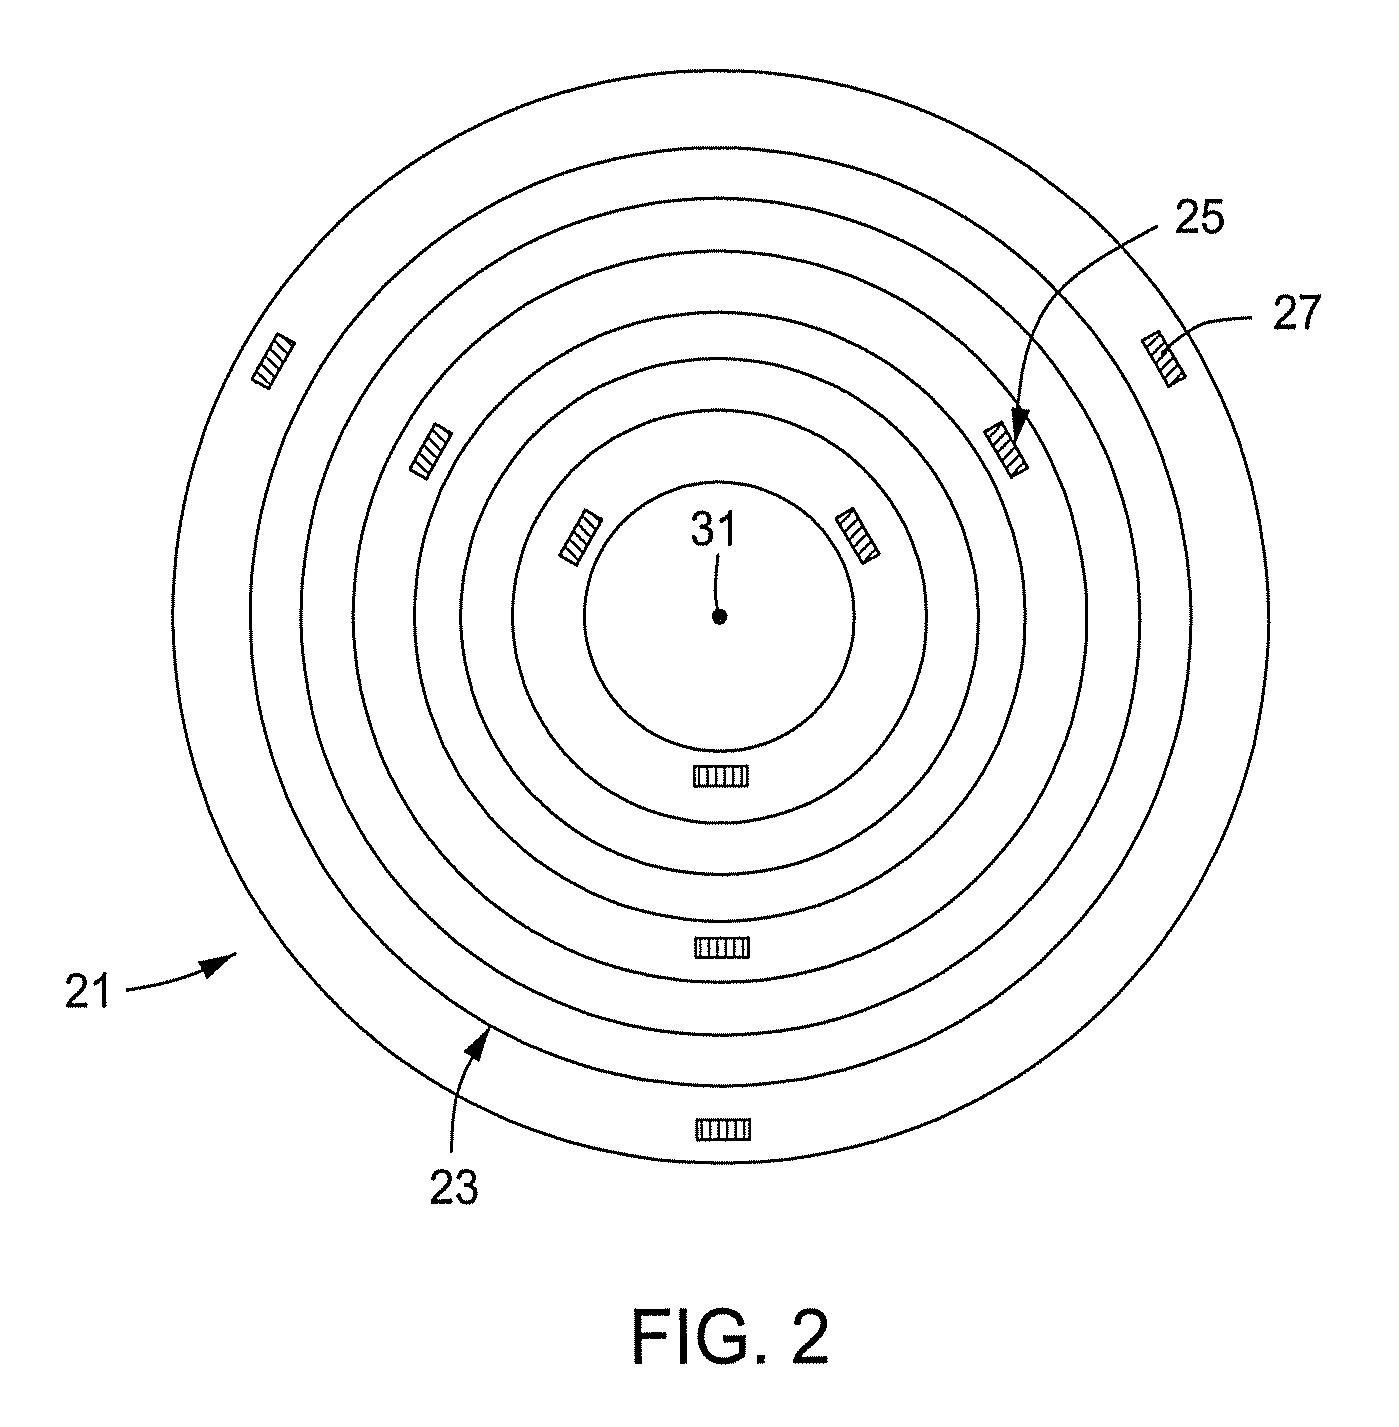 System, method and apparatus for performing metrology on patterned media disks with test pattern areas